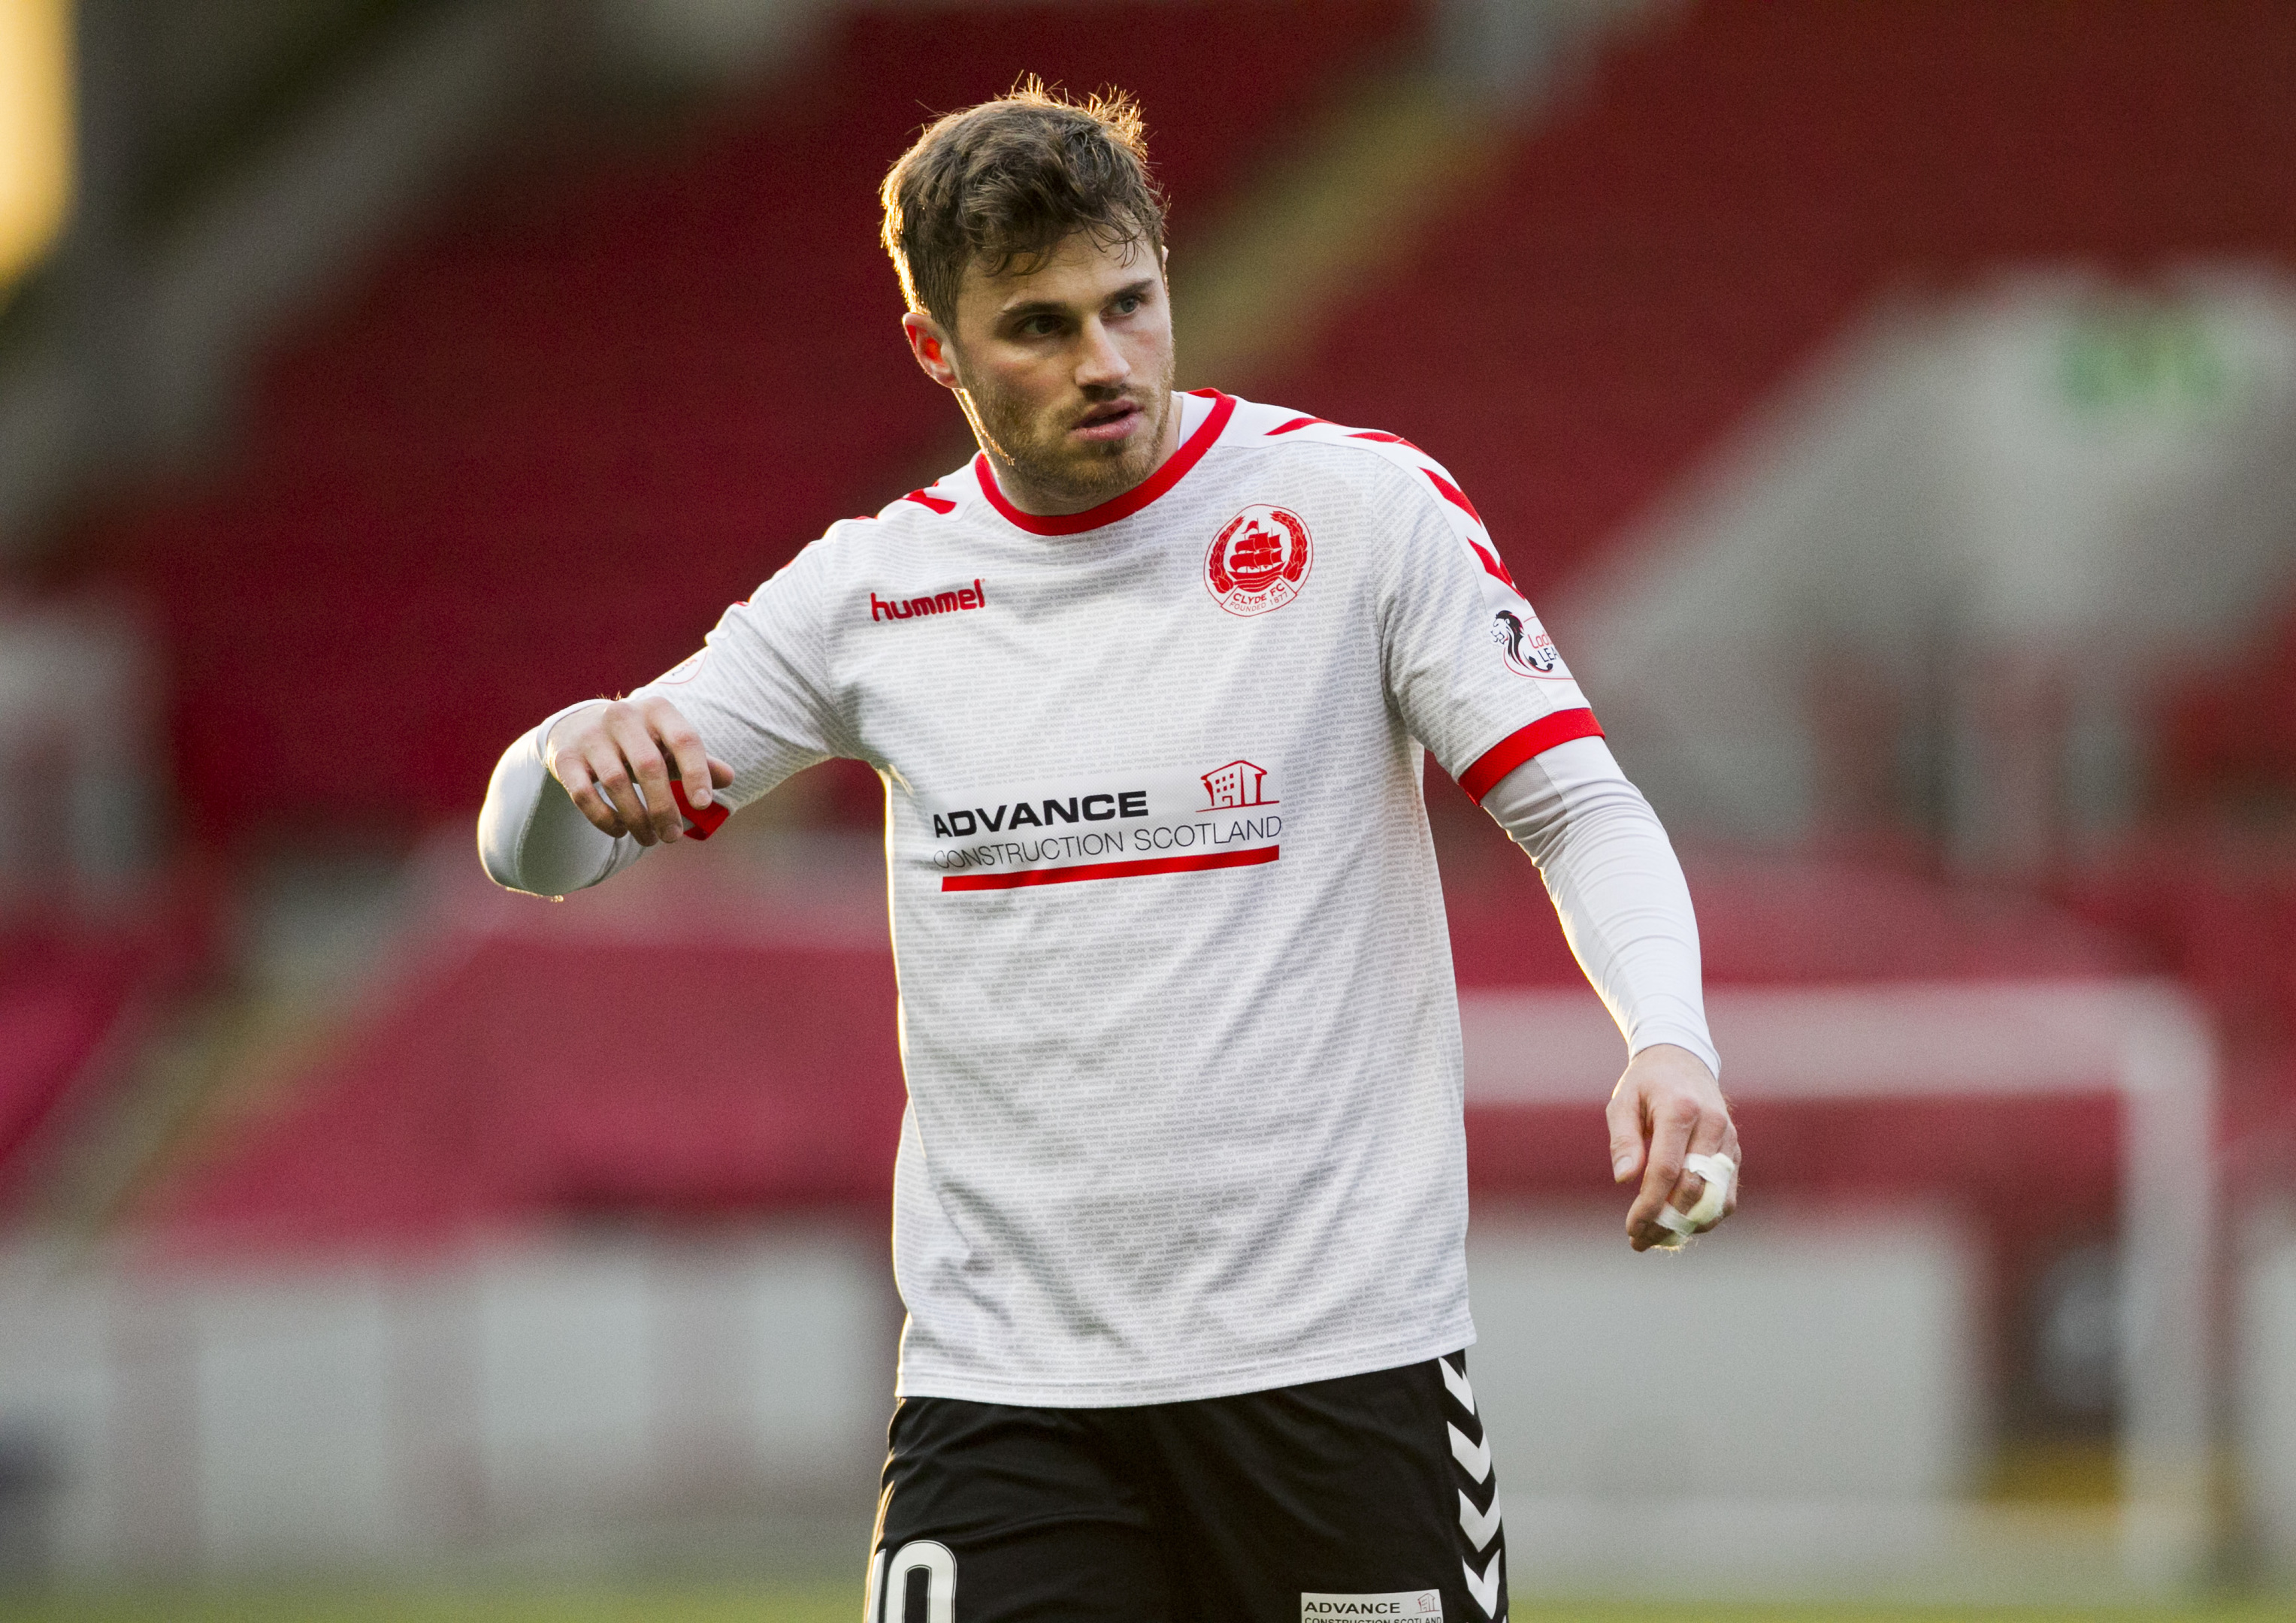 David Goodwillie playing in the match, Clyde FC vs Montrose (Andrew Cawley/DC Thomson)